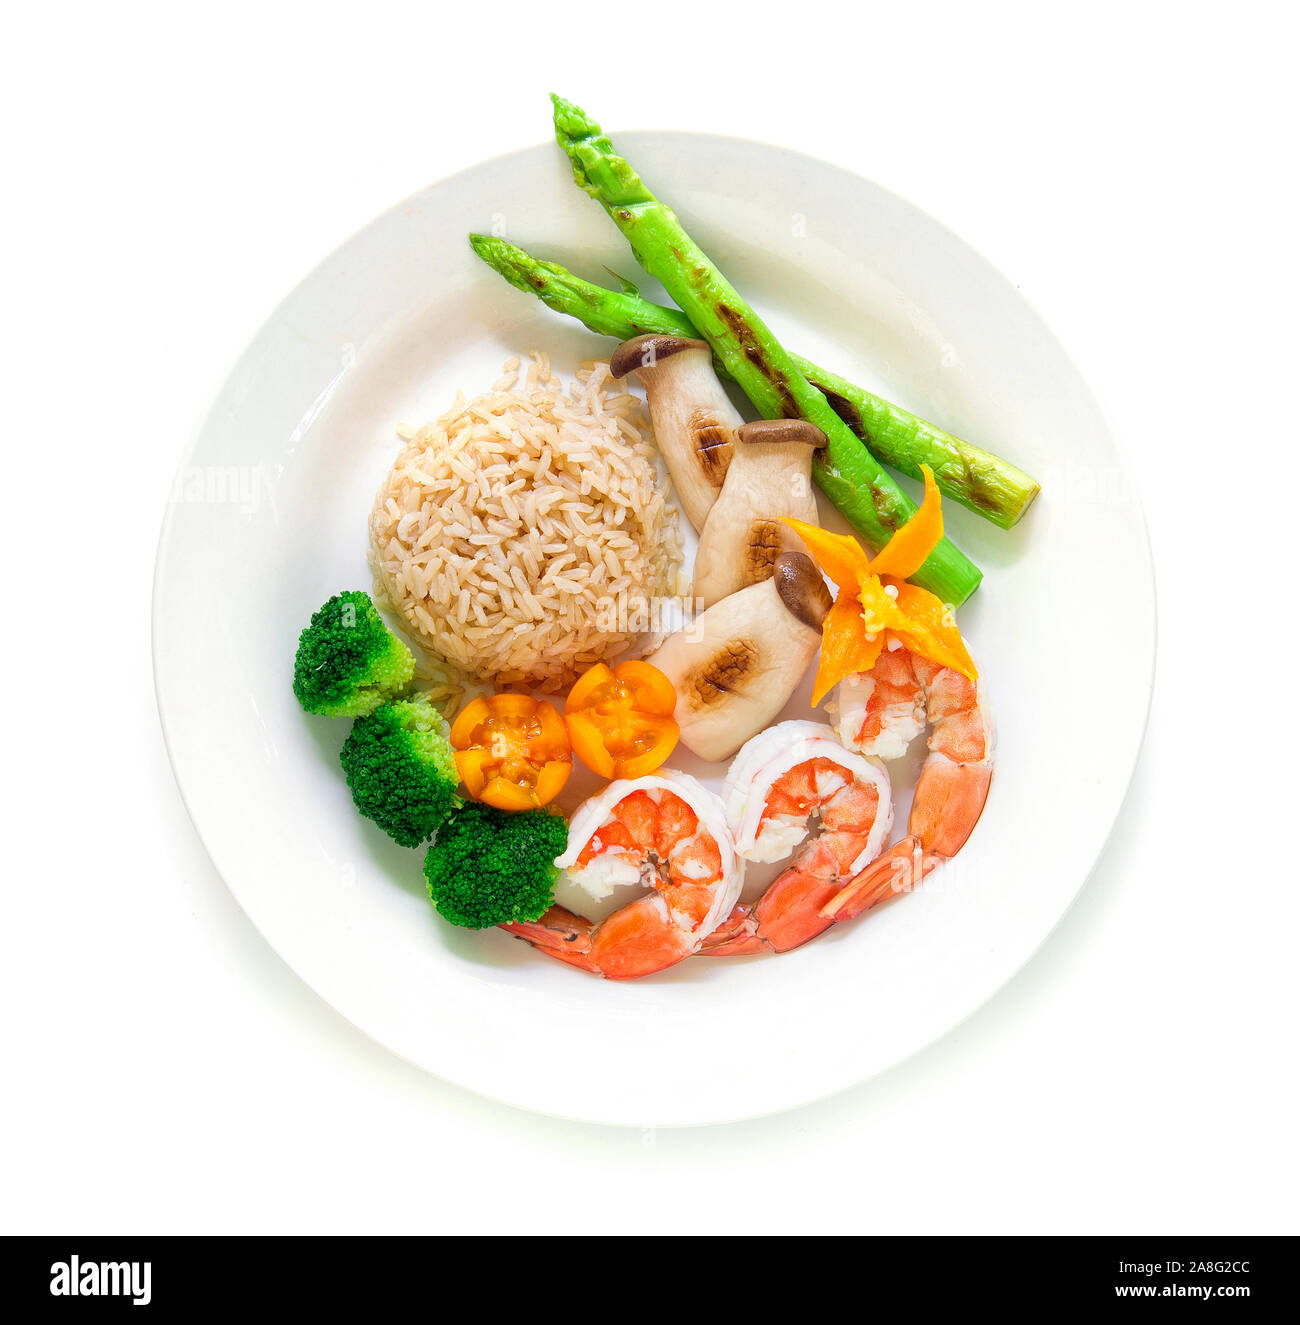 Healthy food Brown rice with shrimp, Broccoli, Grill Asparagus and king oyster mushrooms decorate with carved chili, tomato top view Stock Photo